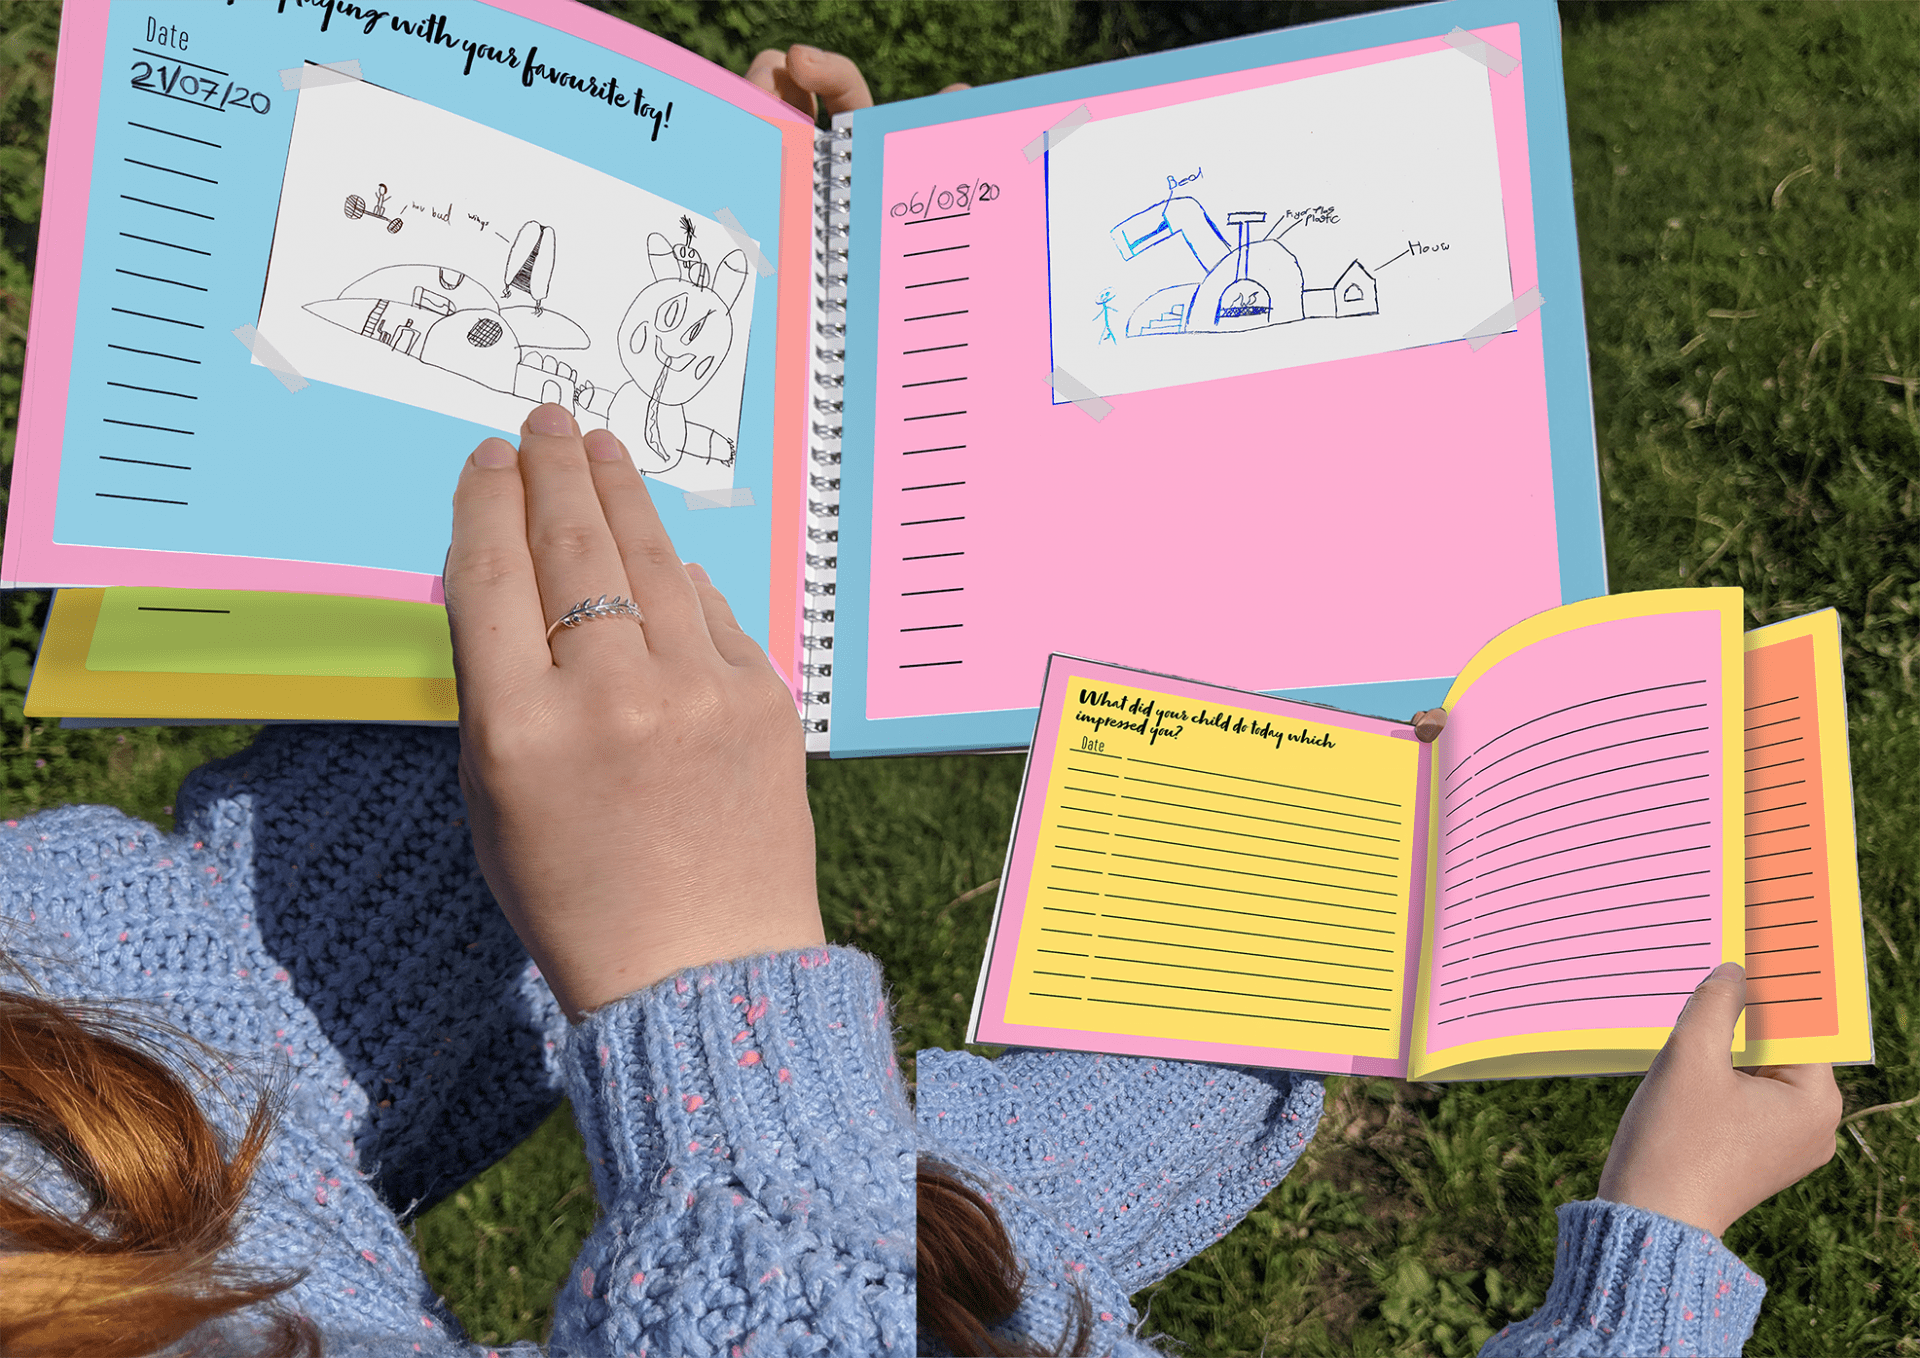 Someone holding a brightly coloured book - to preserve memories and ideas, there are several journal pages for both parents and children to write on with a different question or prompt on each page.